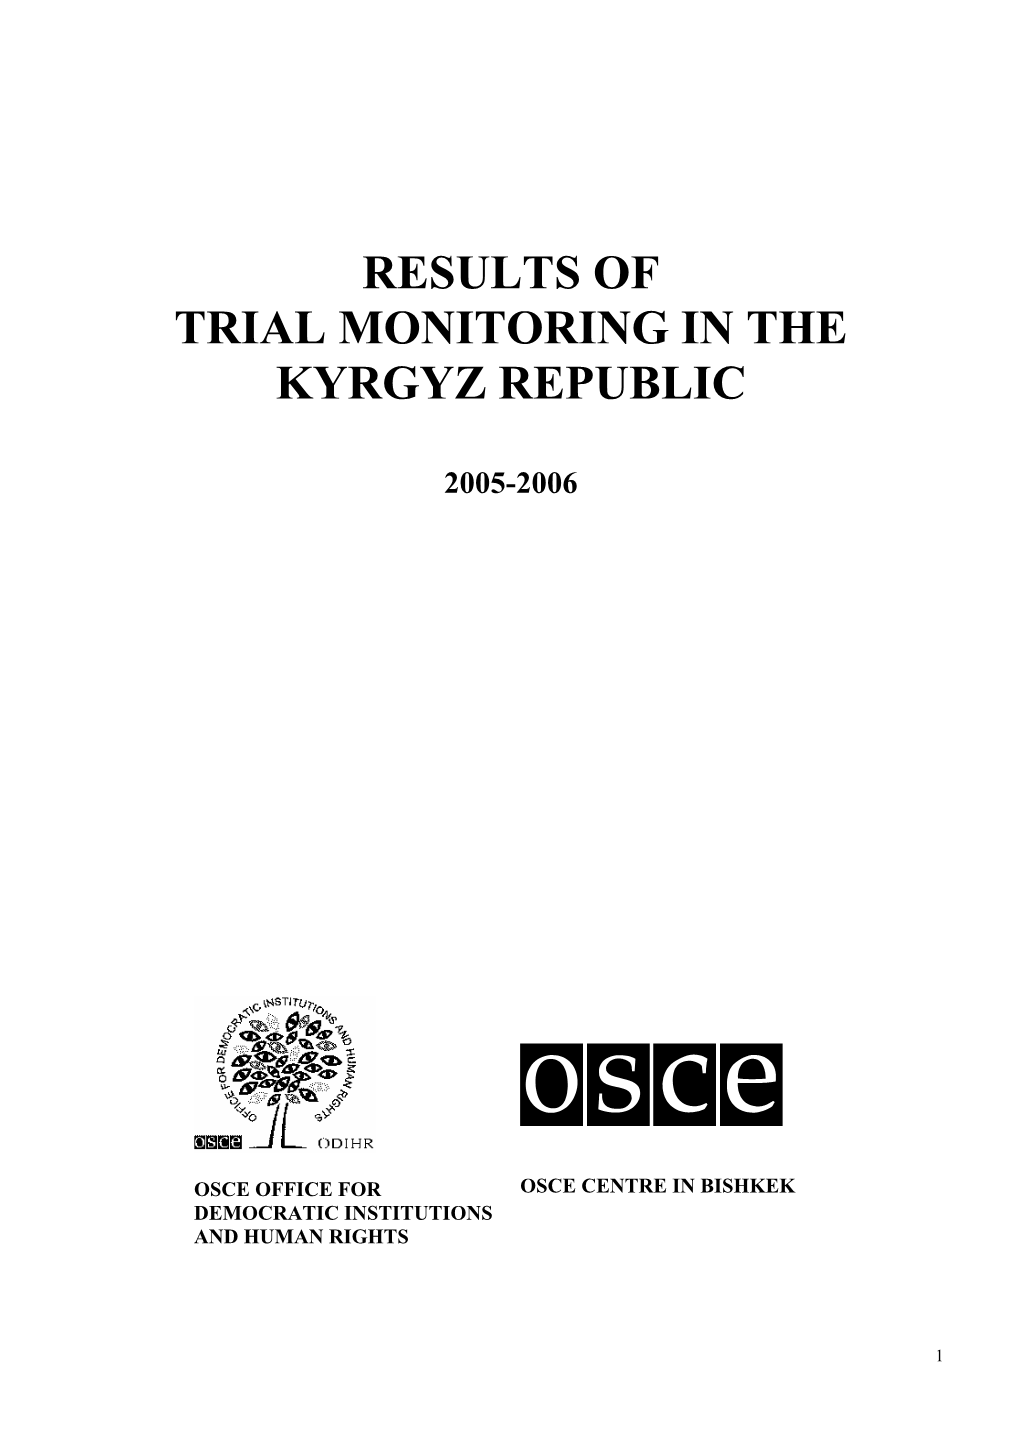 Results of Trial Monitoring in the Kyrgyz Republic